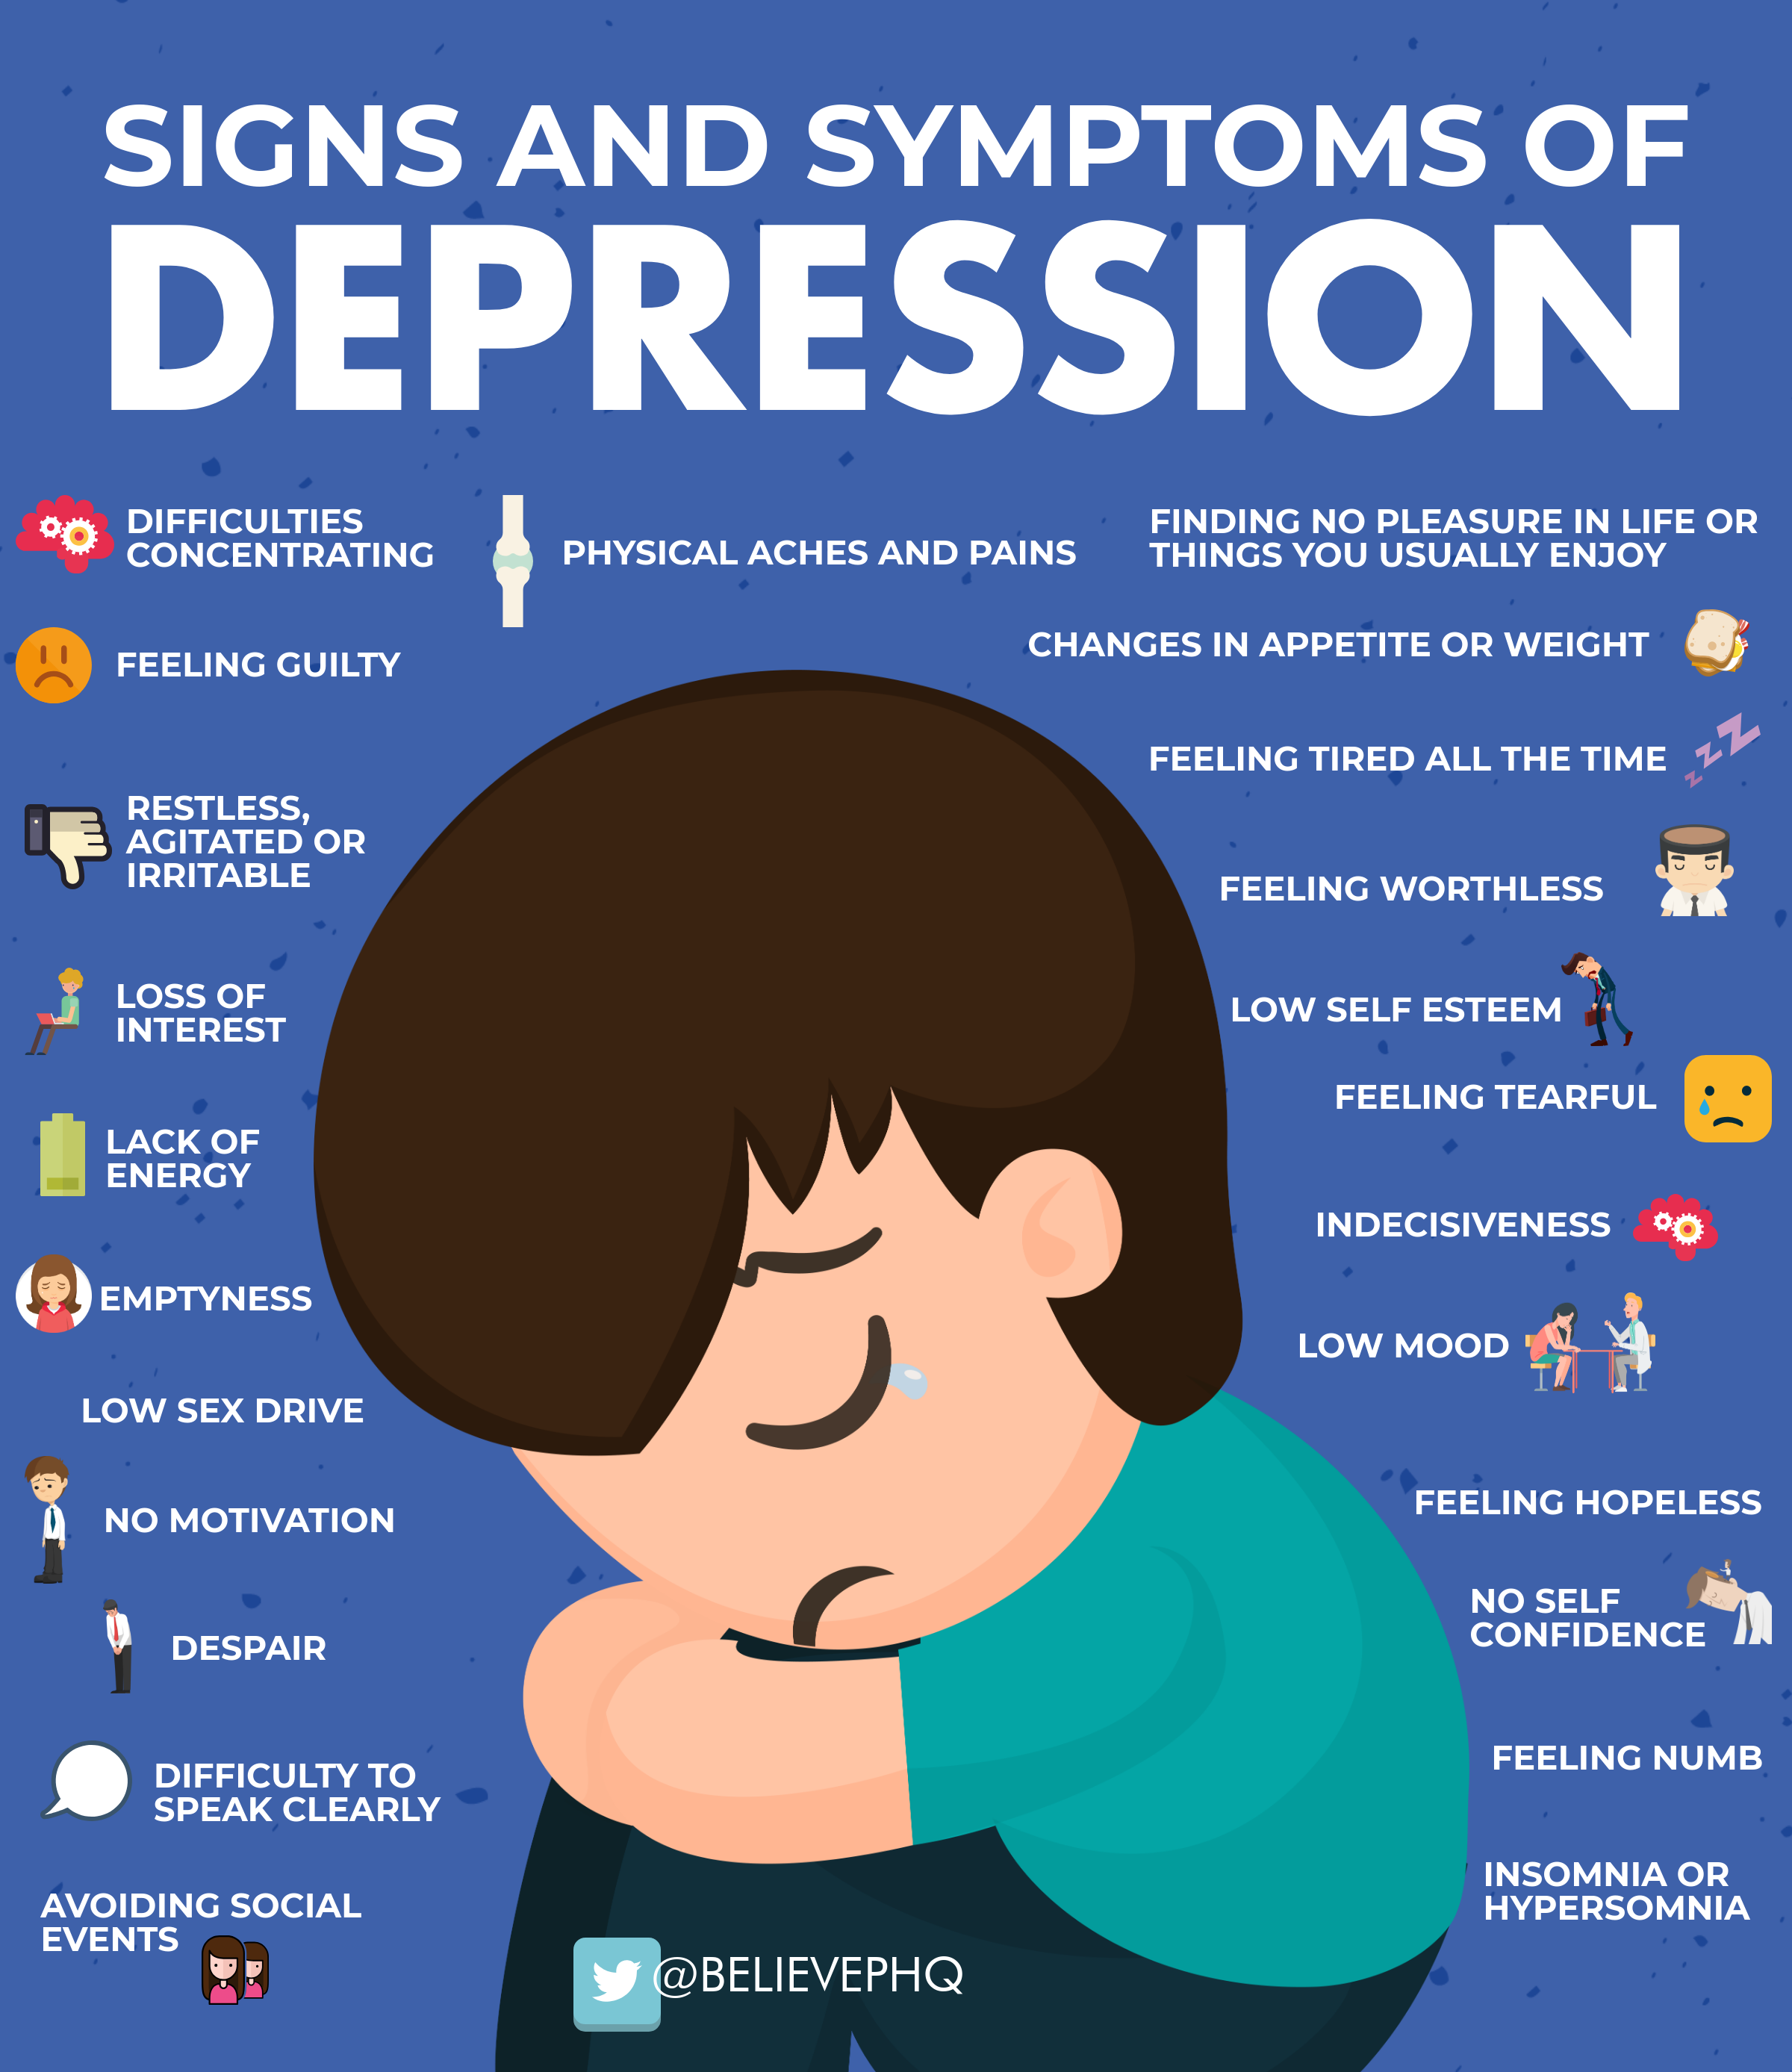 Signs and symptoms of depression